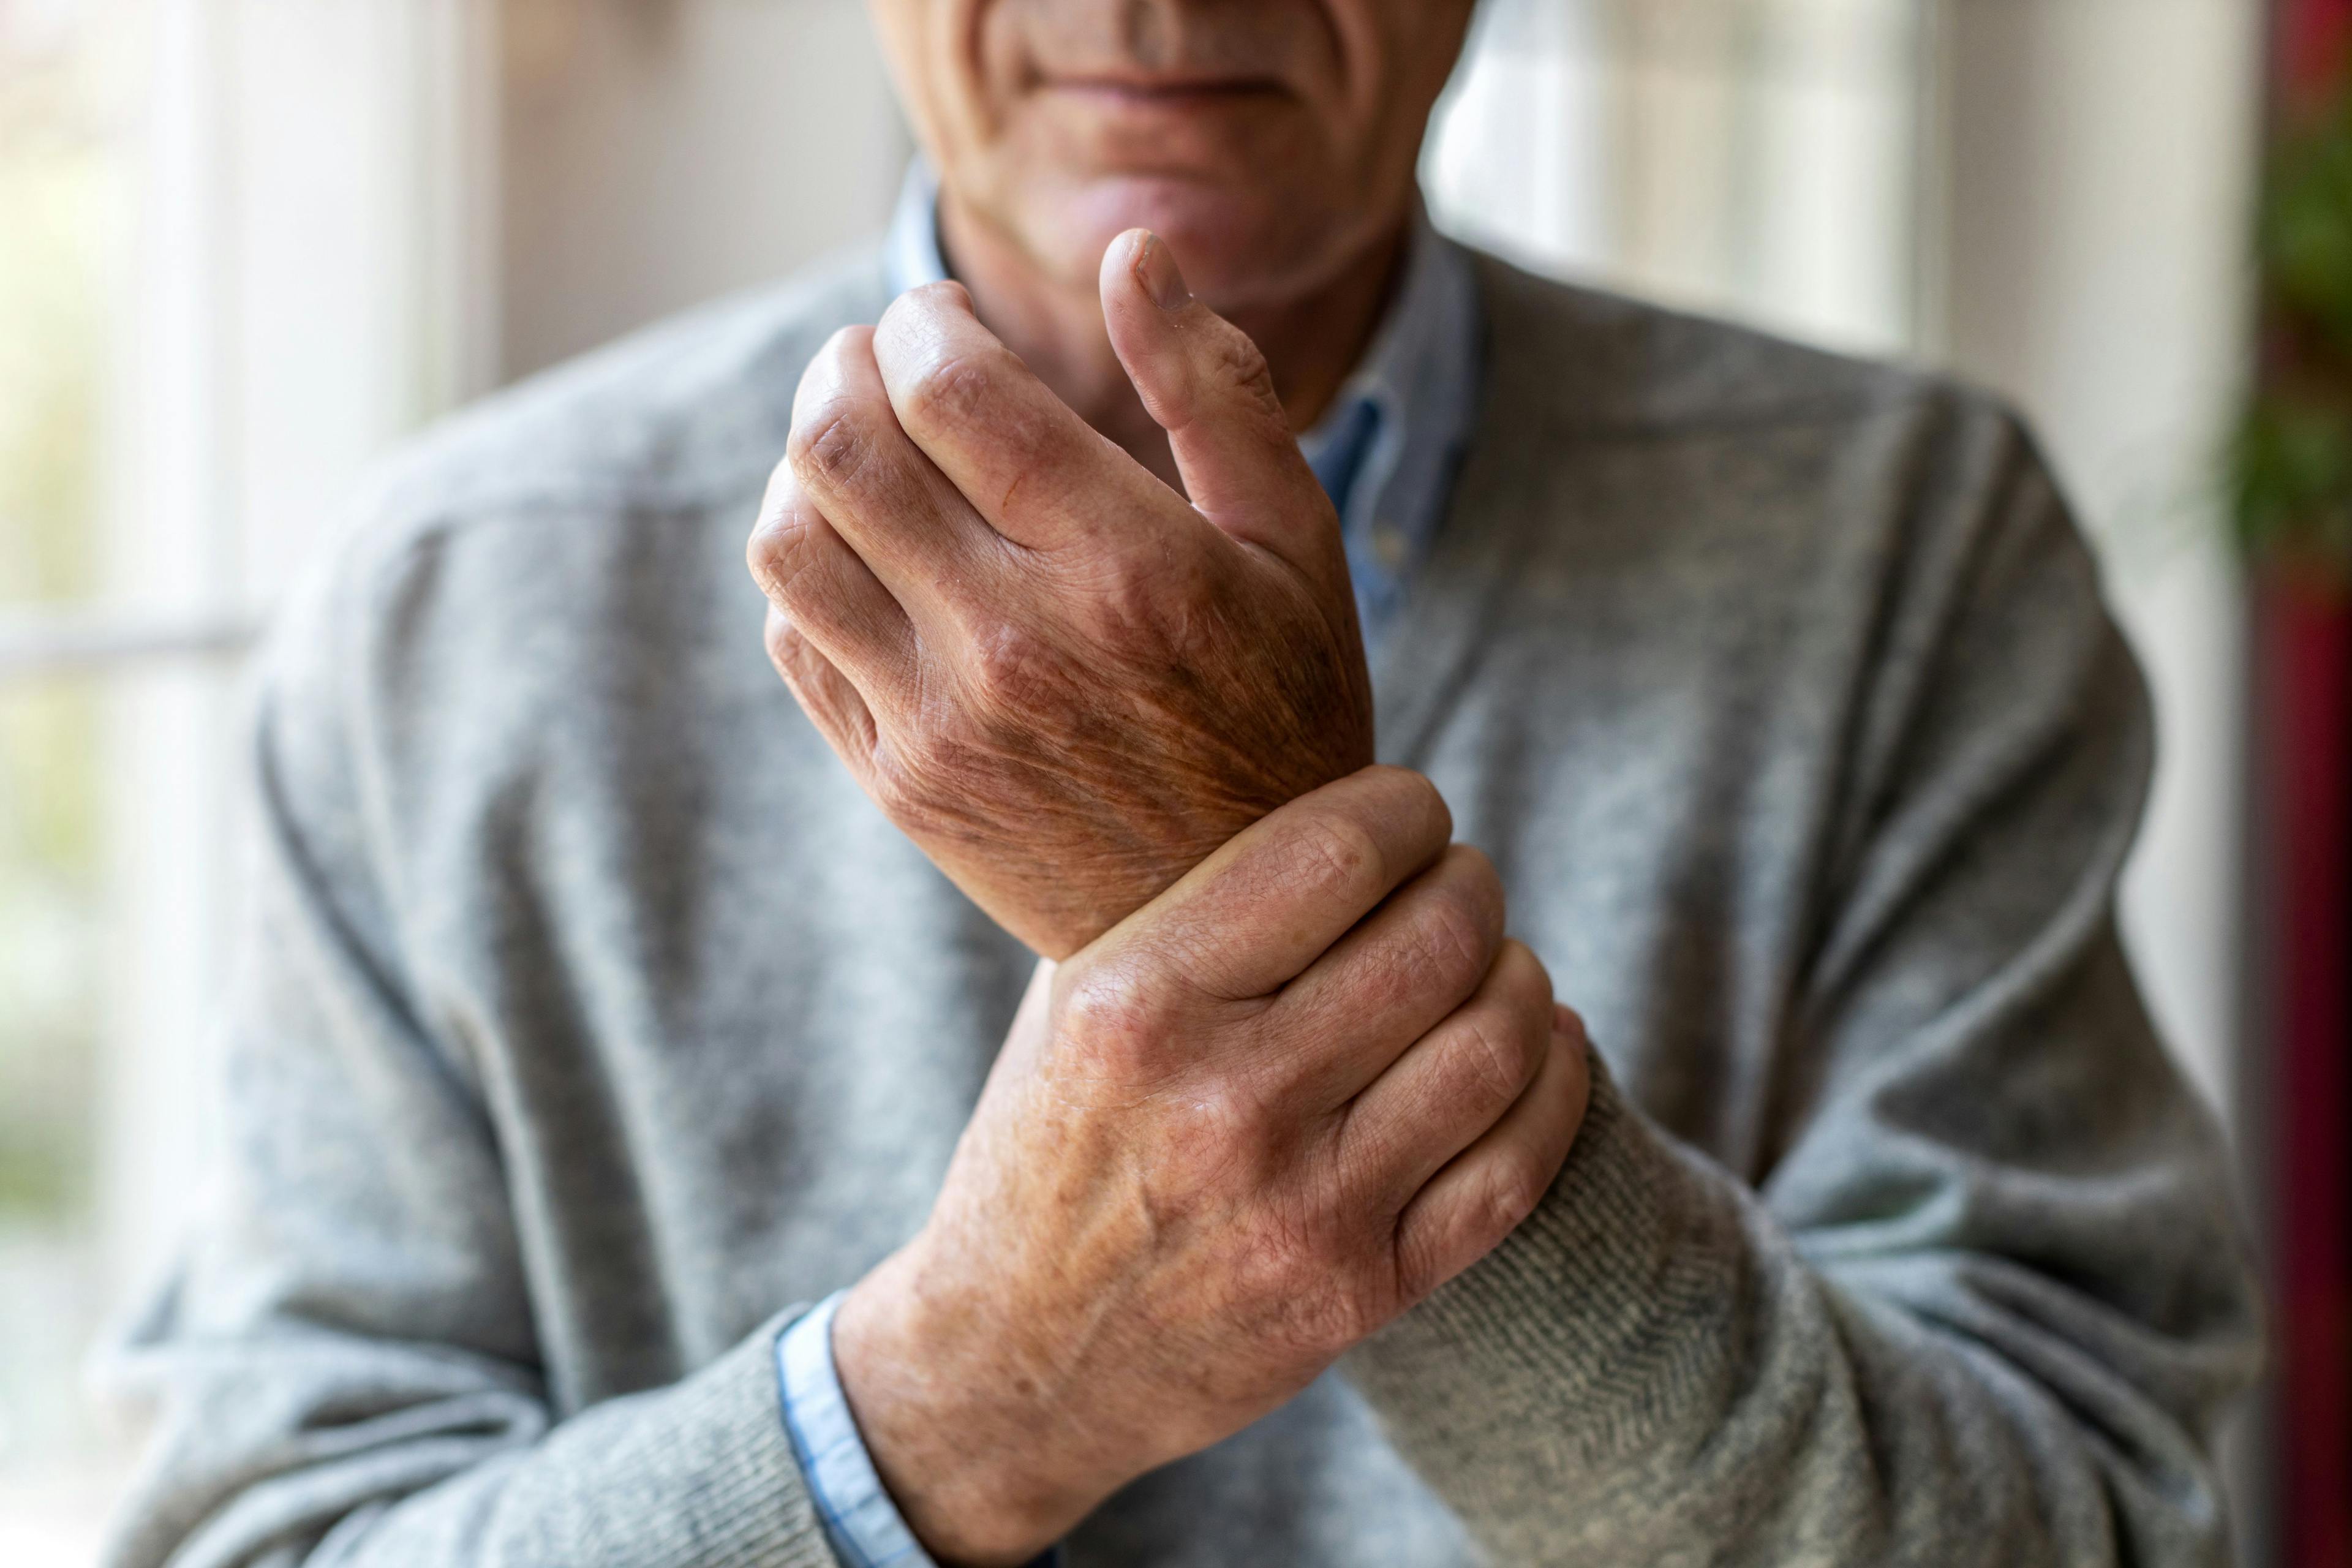 Inflammatory Arthritis: Trends, Risk Factors, and What Rheumatologists Need to Know